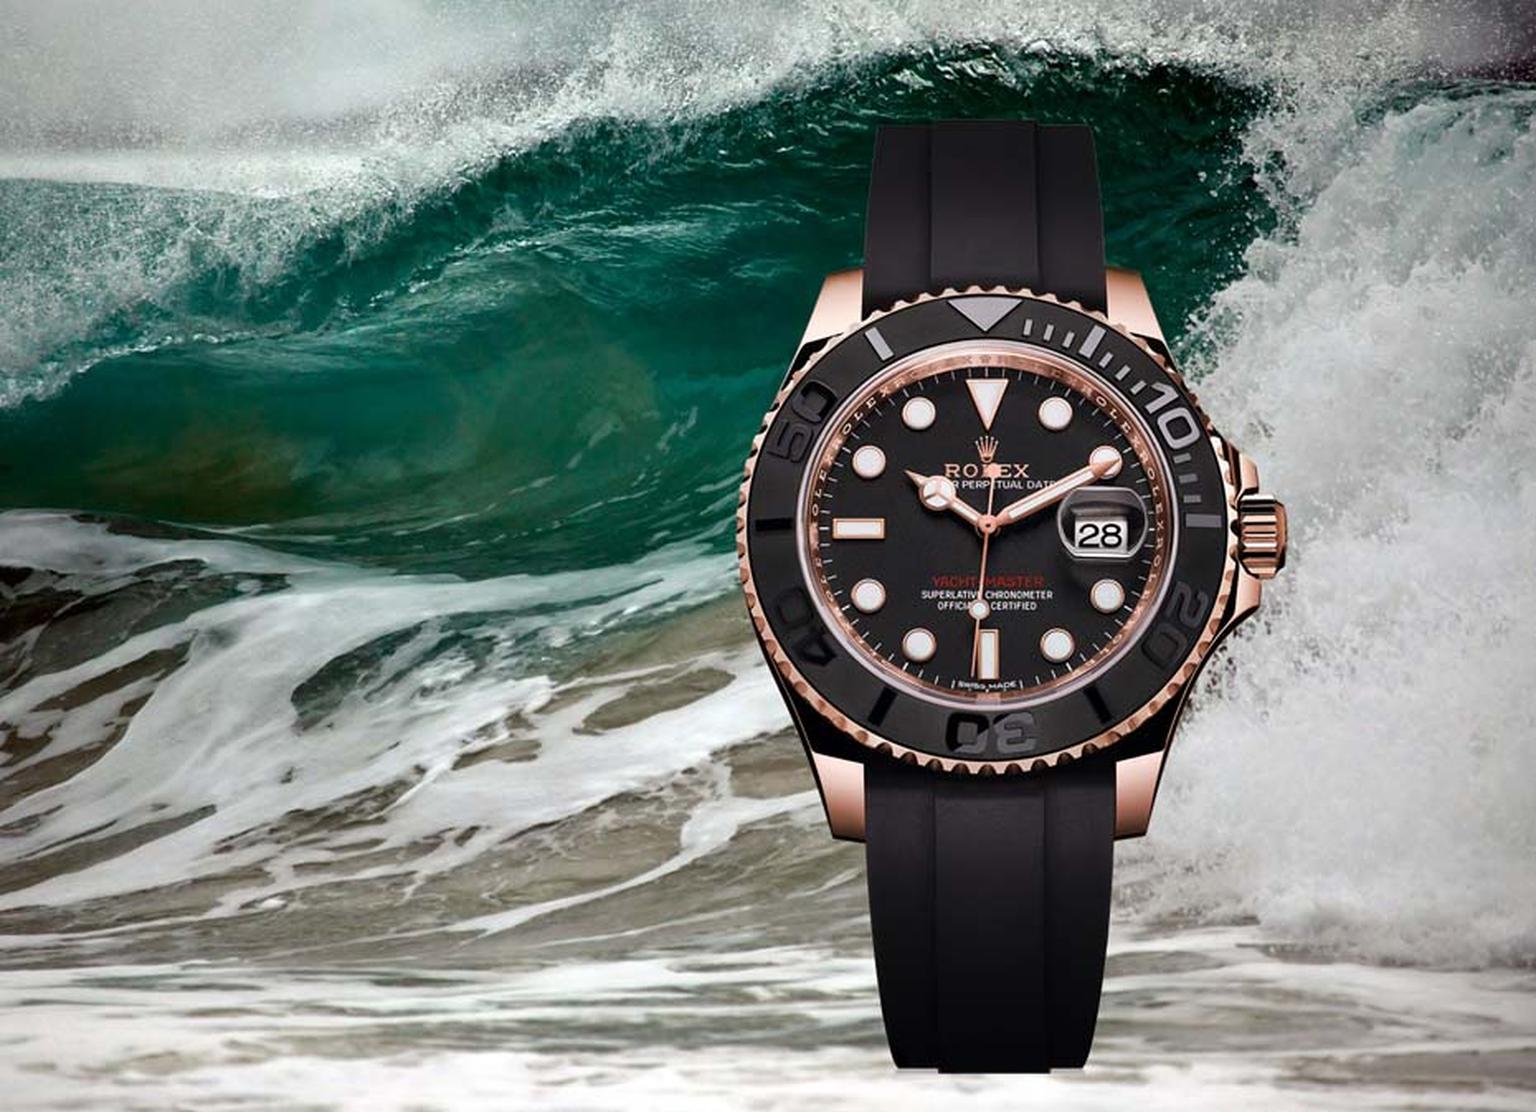 https://www.thejewelleryeditor.com/media/images_thumbnails/filer_public_thumbnails/old/56155/Baselworld%202015_Rolex_Yachtmaster_Cover%20photo.jpg__1536x0_q75_crop-scale_subsampling-2_upscale-false.jpg